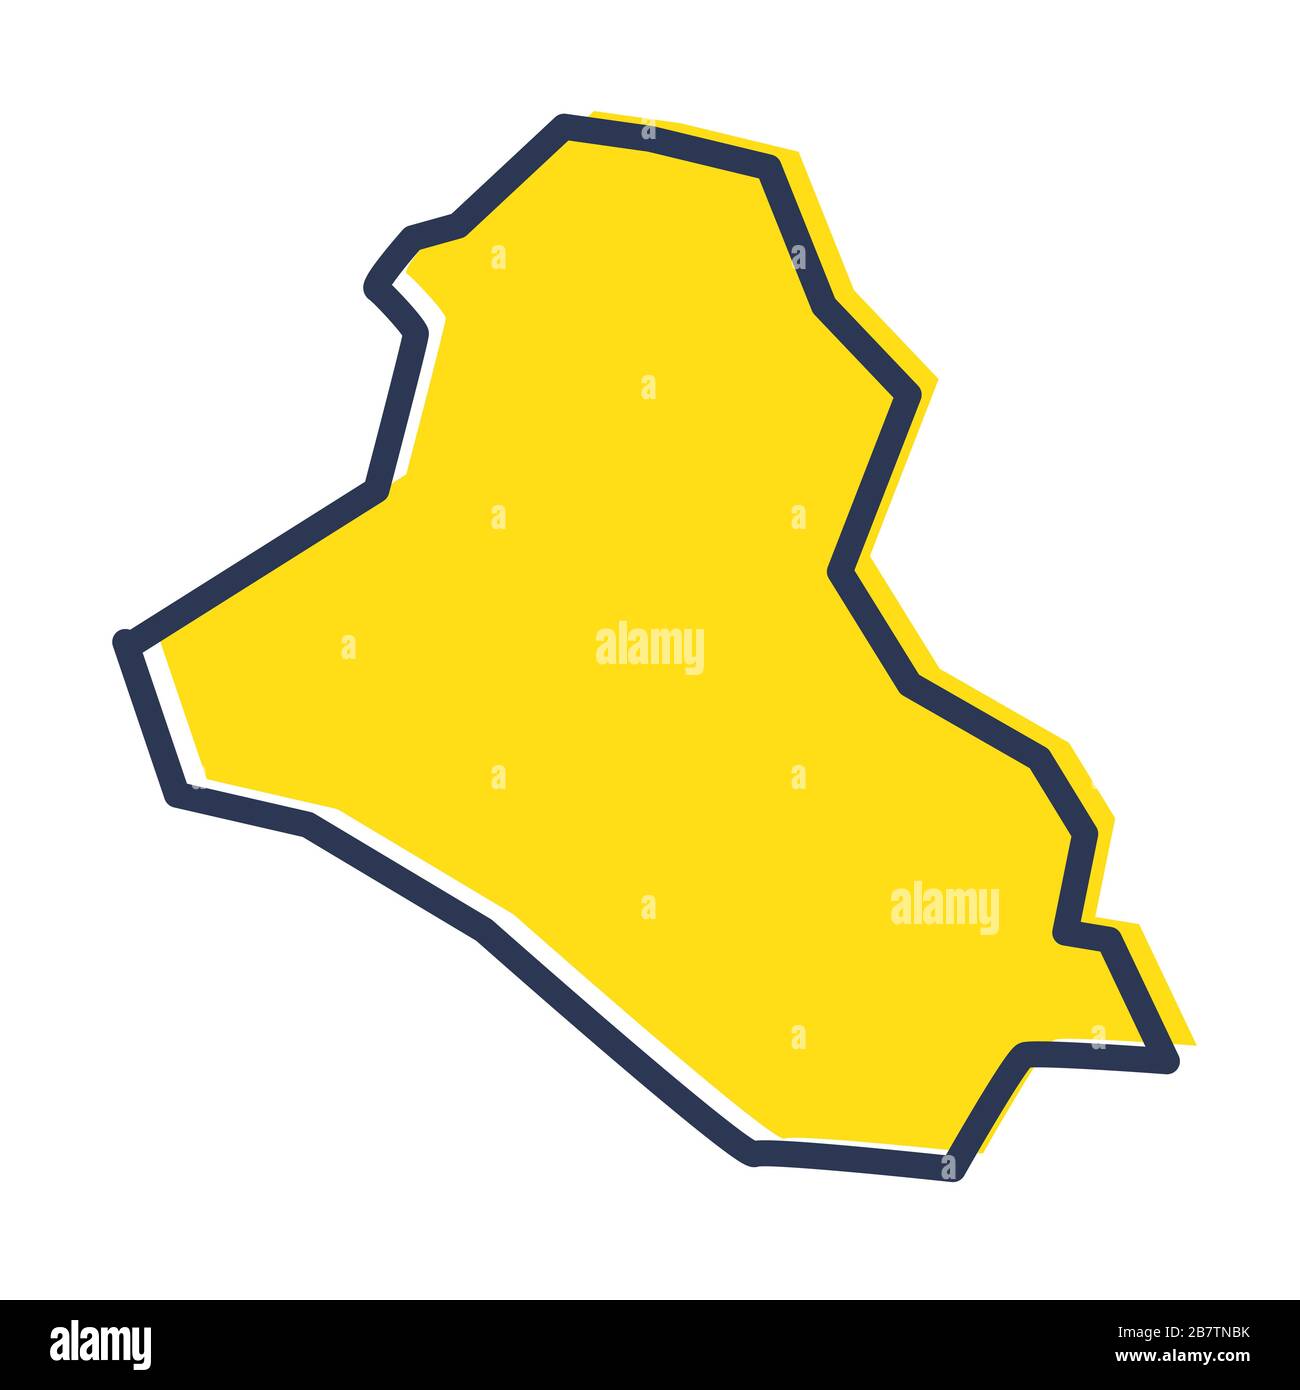 Stylized simple yellow outline map of Iraq Stock Vector